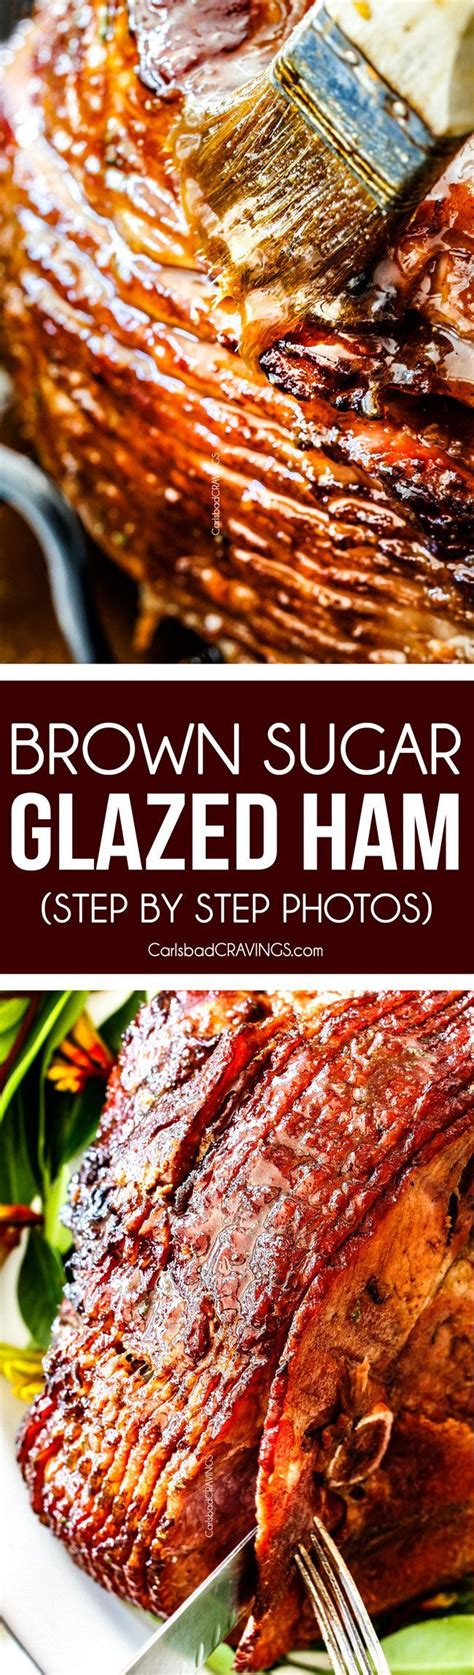 Brown Sugar Glazed Ham With Step By Step Photos Is Beautifully Juicy